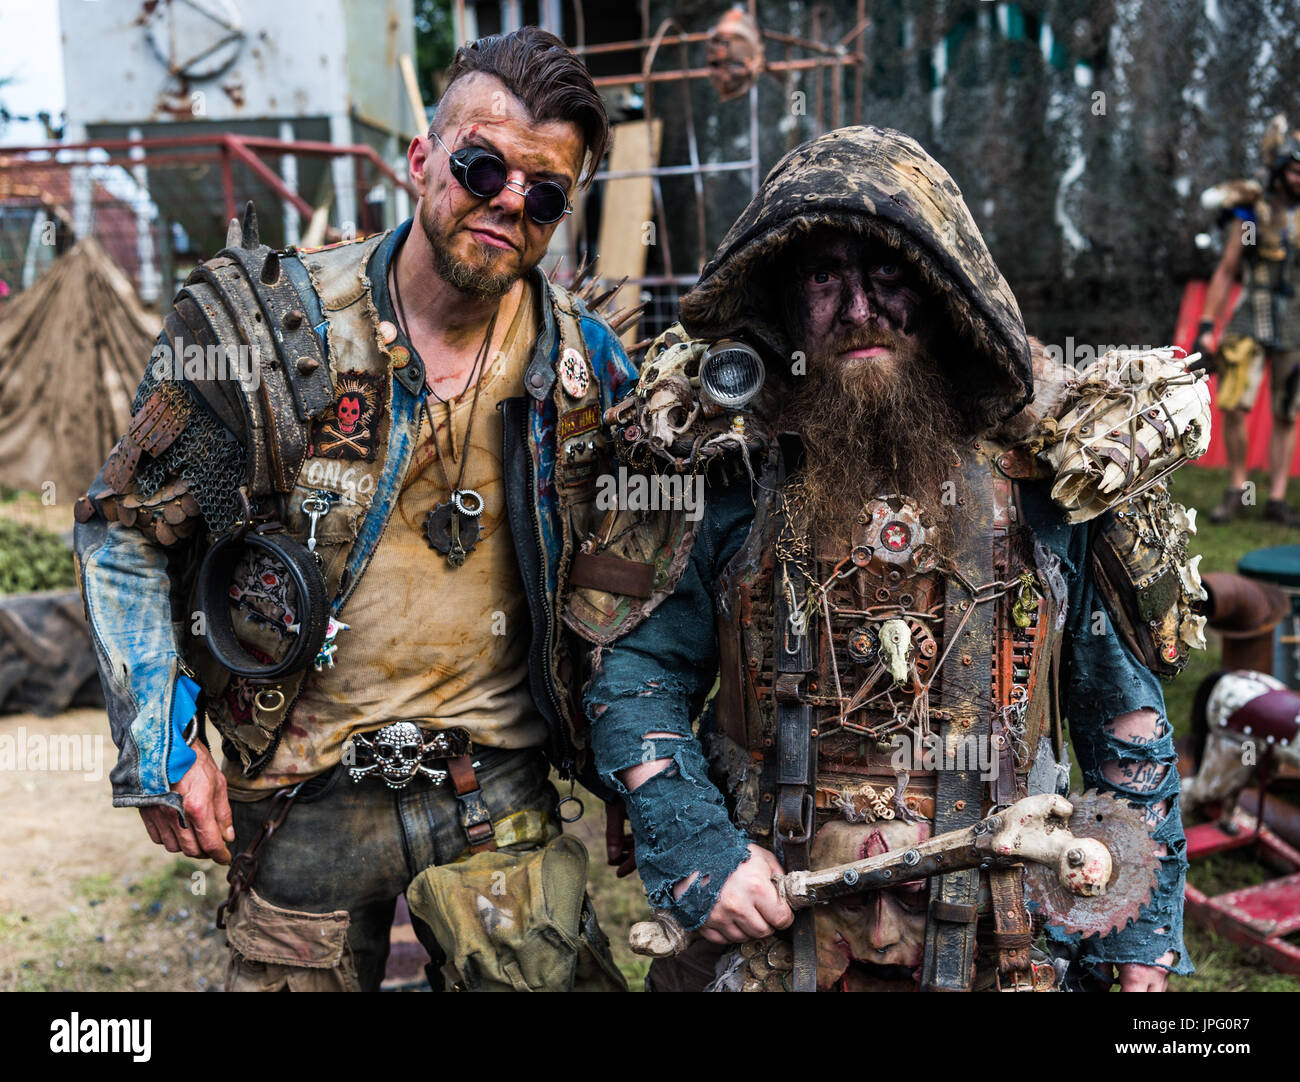 Wacken, Germany. 02nd Aug, 2017. Henri(L) and Chris from the Wasteland Warriors look at the camera at the Wacken Open Air Festival in Wacken, Germany, 02 August 2017. The Wacken Open Air festival takes place between 03 and 05 August 2017. Photo: Christophe Gateau/dpa/Alamy Live News Stock Photo